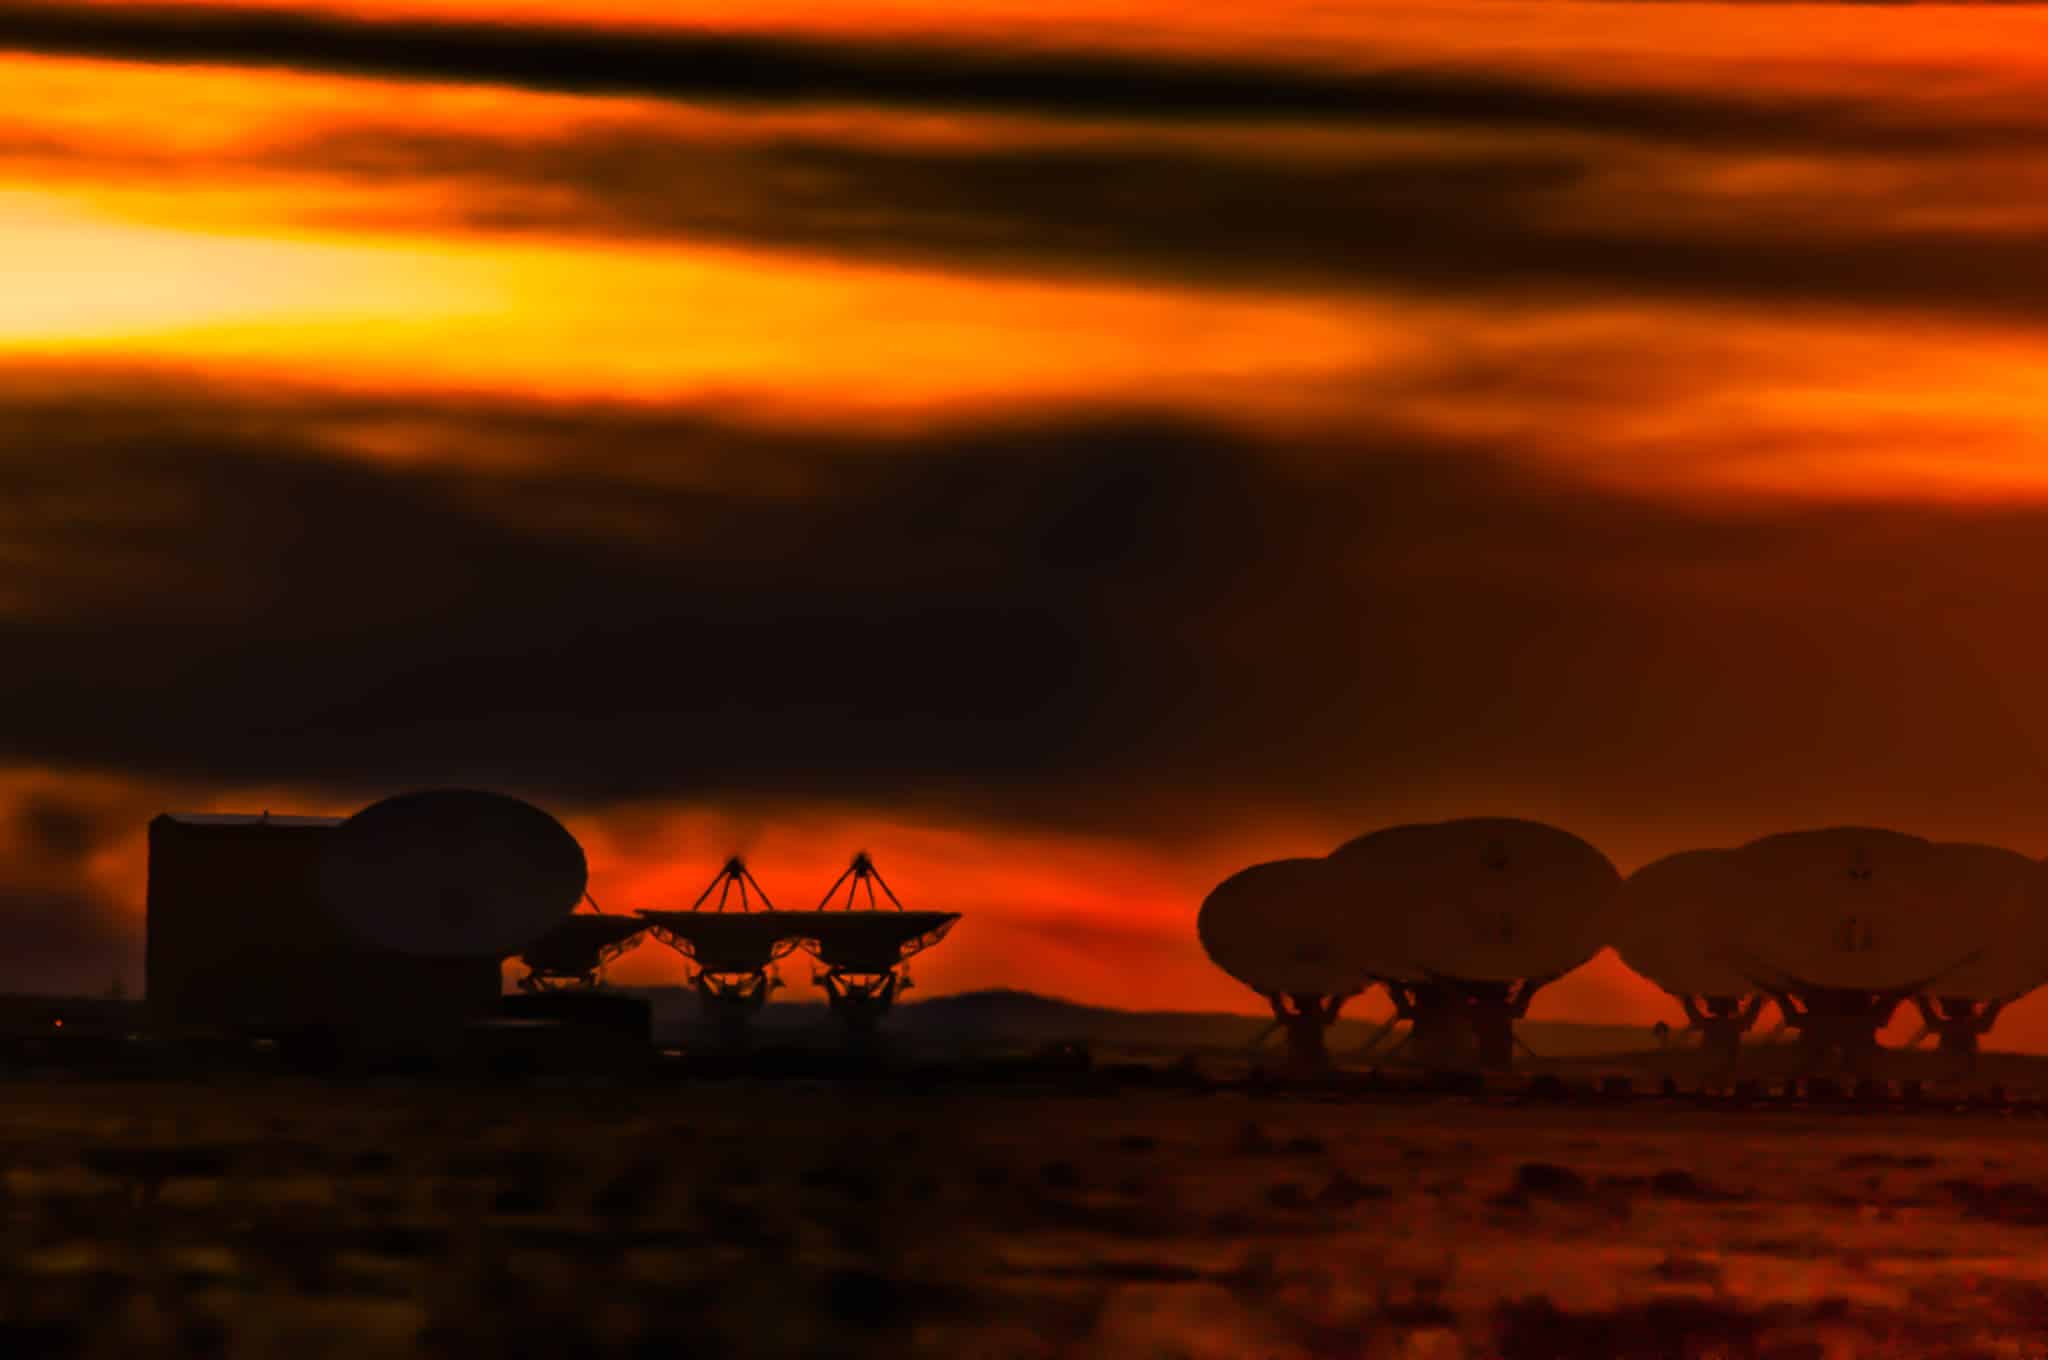 Antennae of the Very Large Array radio observatory, west of Socorro, New Mexico, at sunset.